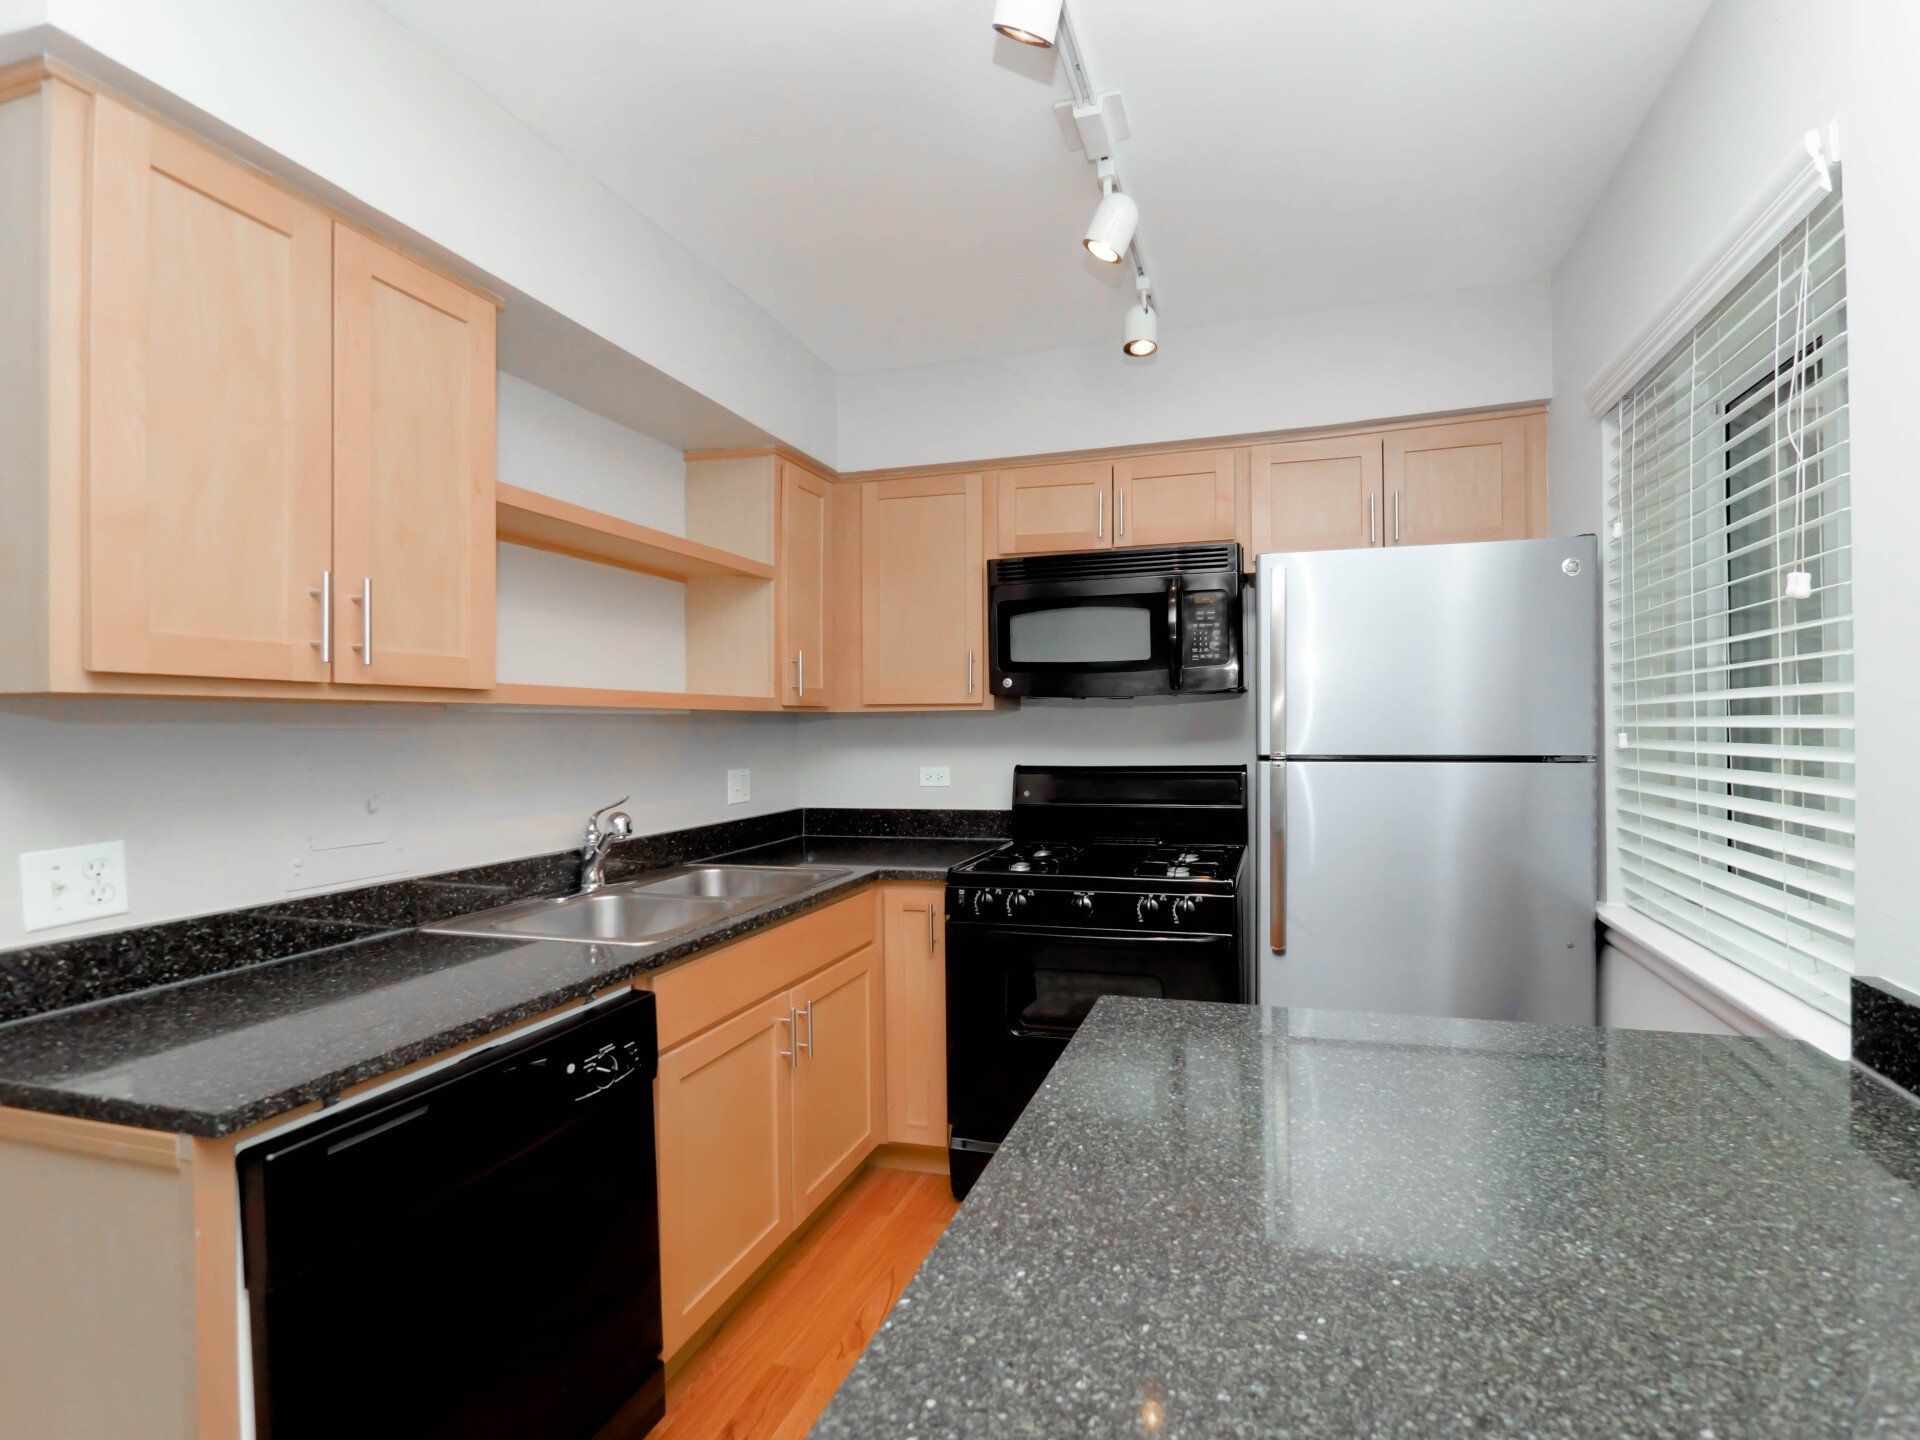 A kitchen with stainless steel appliances and granite countertops at Reside on Morse.